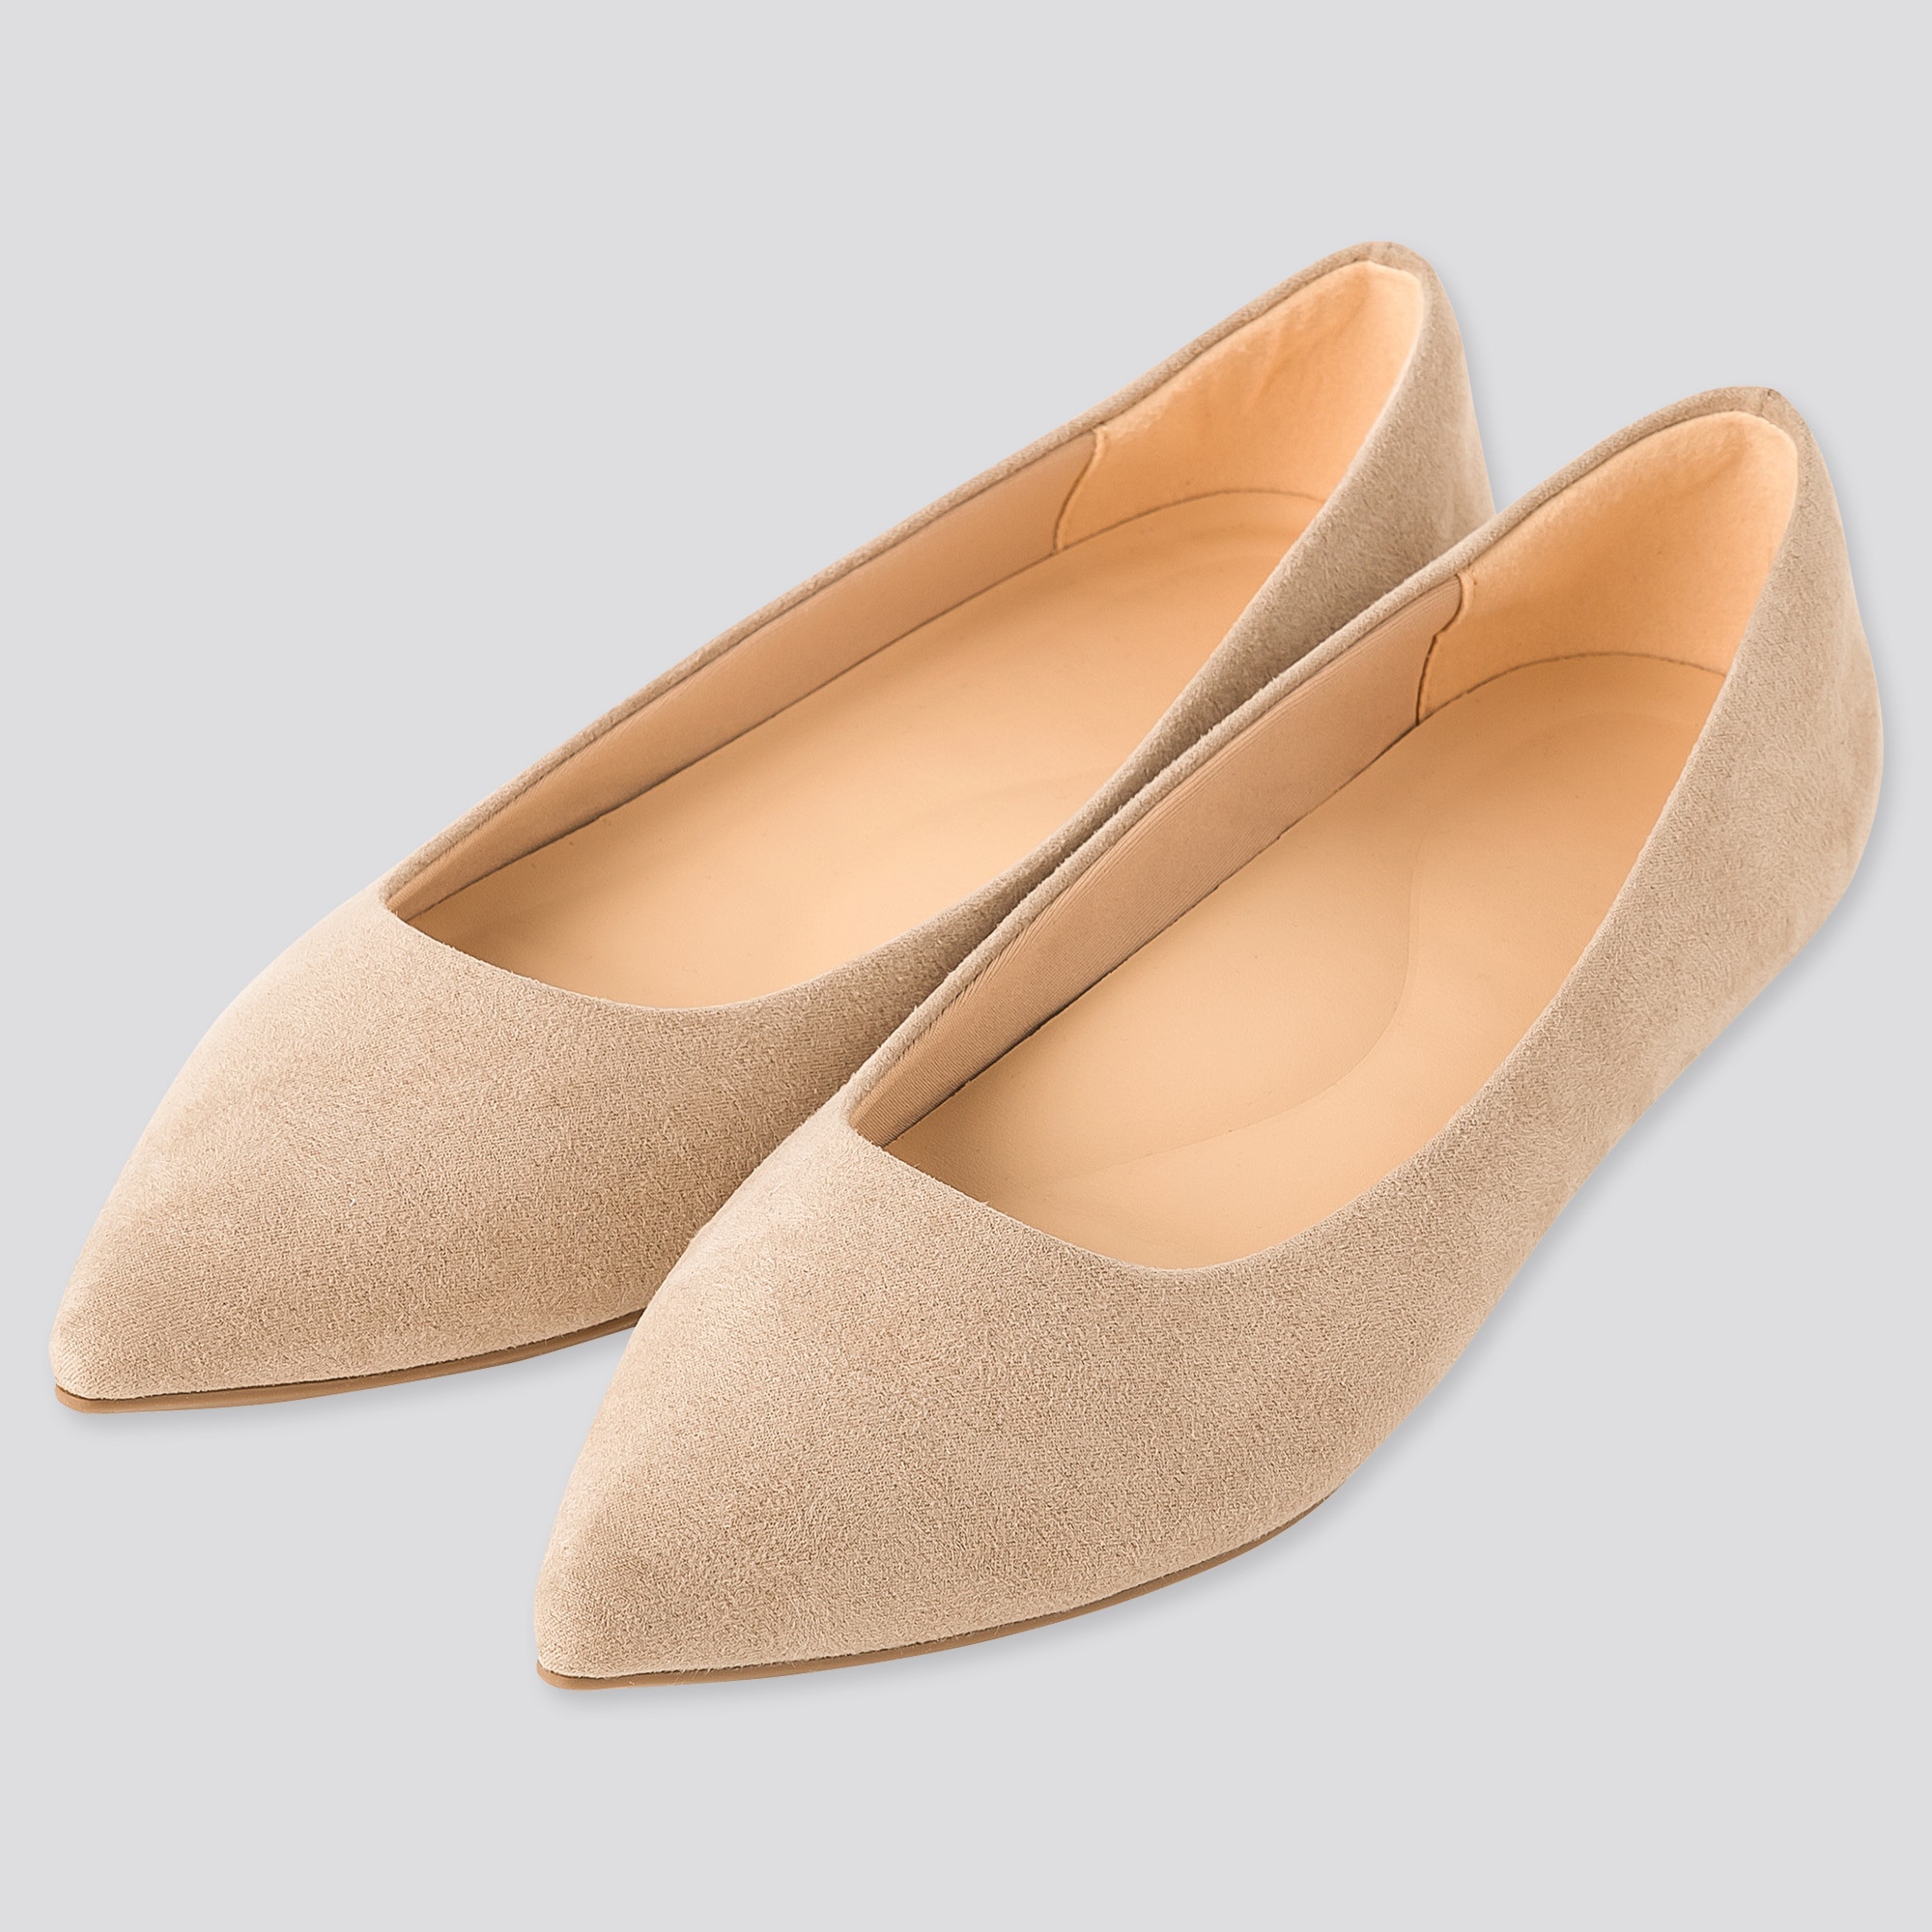 WOMEN COMFORT FEEL POINTED FLAT SHOES 